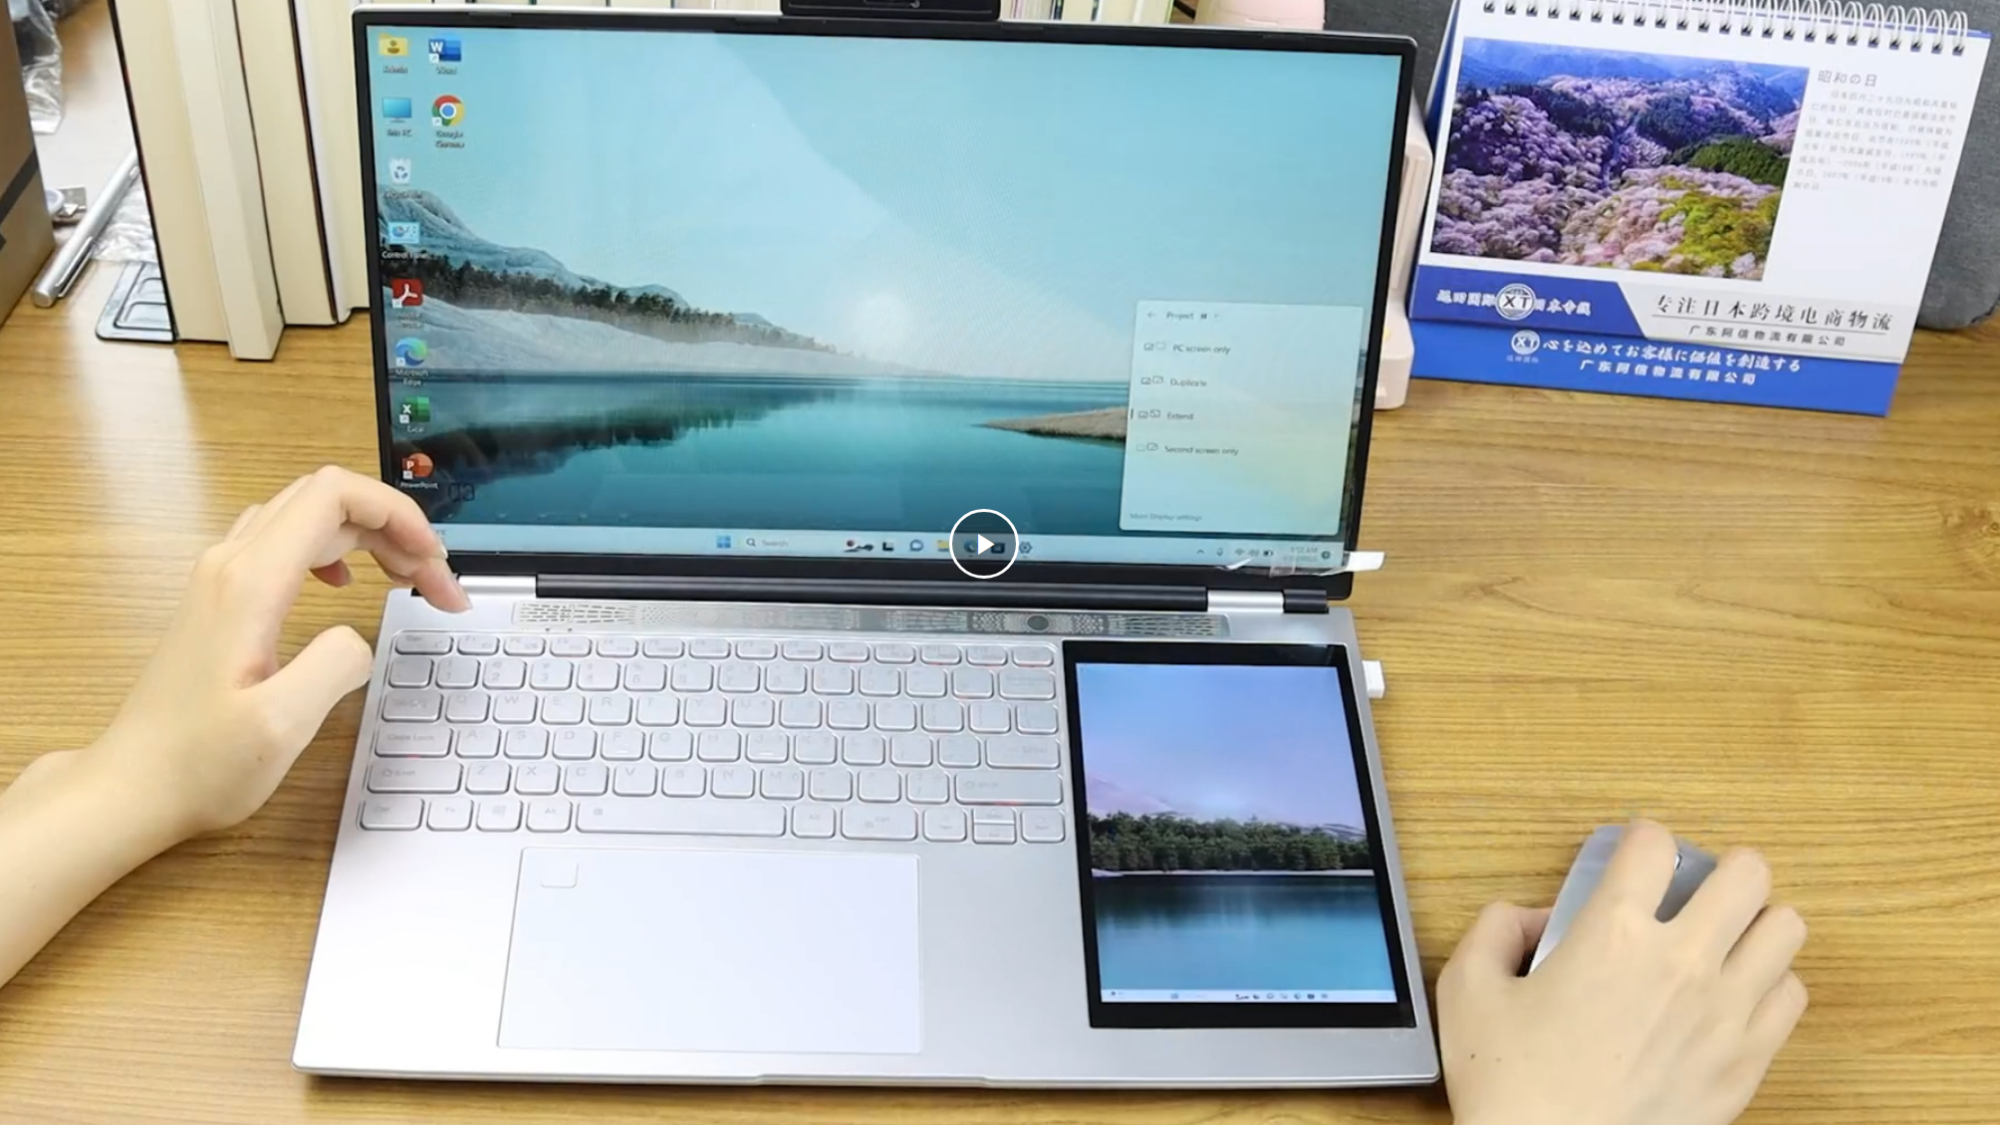 This incredible $500 laptop has built-in 7-inch tablet, a tiny removable webcam and even Microsoft Office thumbnail